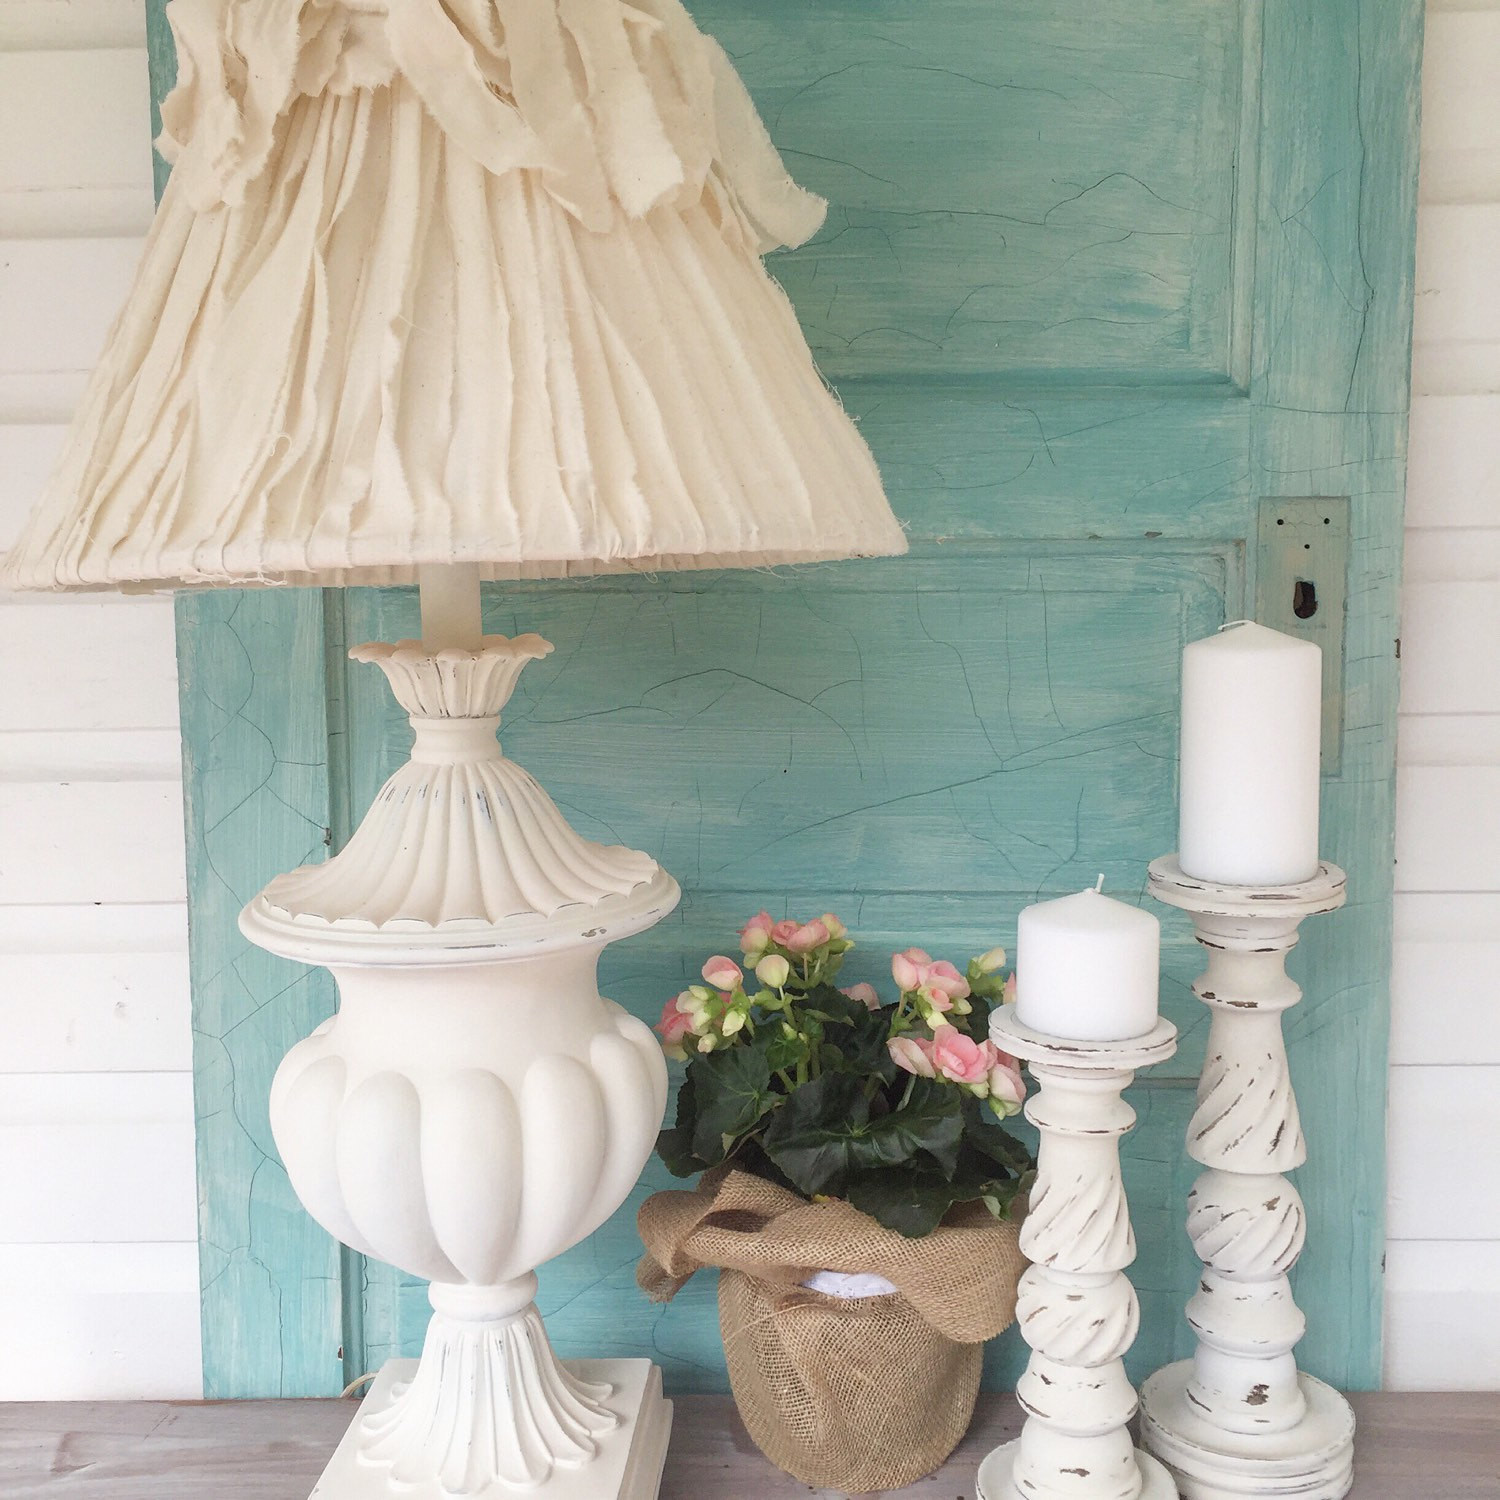 Shabby Chic Bedroom Lamps
 White Shabby Chic Table Lamp Bedroom Light with Cream Tattered